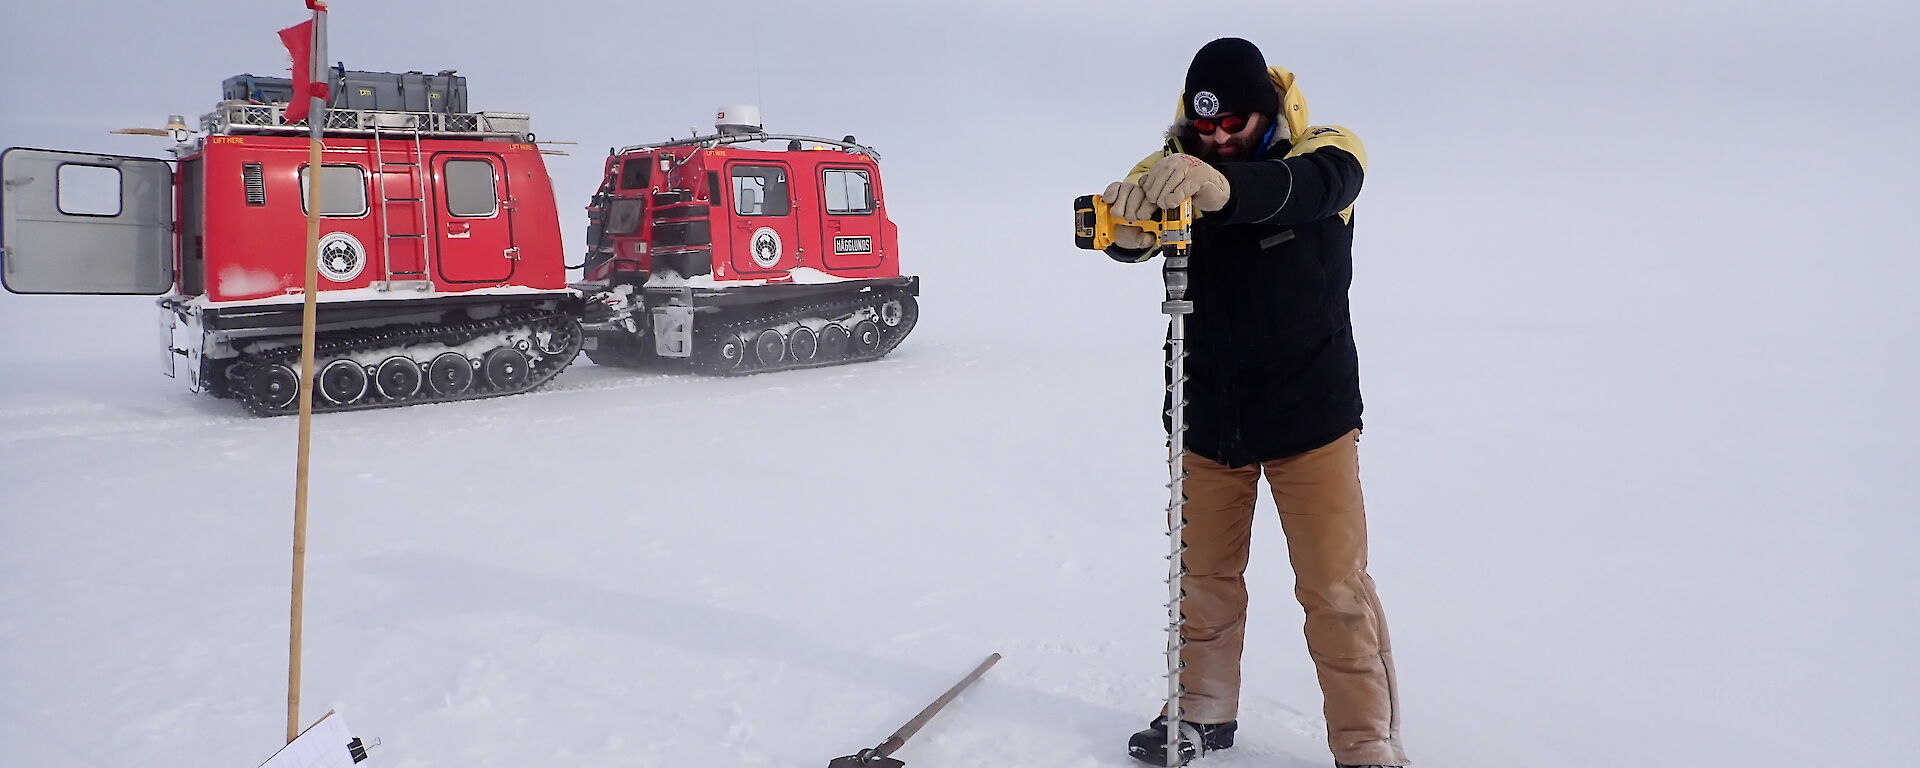 A man drills the sea ice in front of a red vehicle